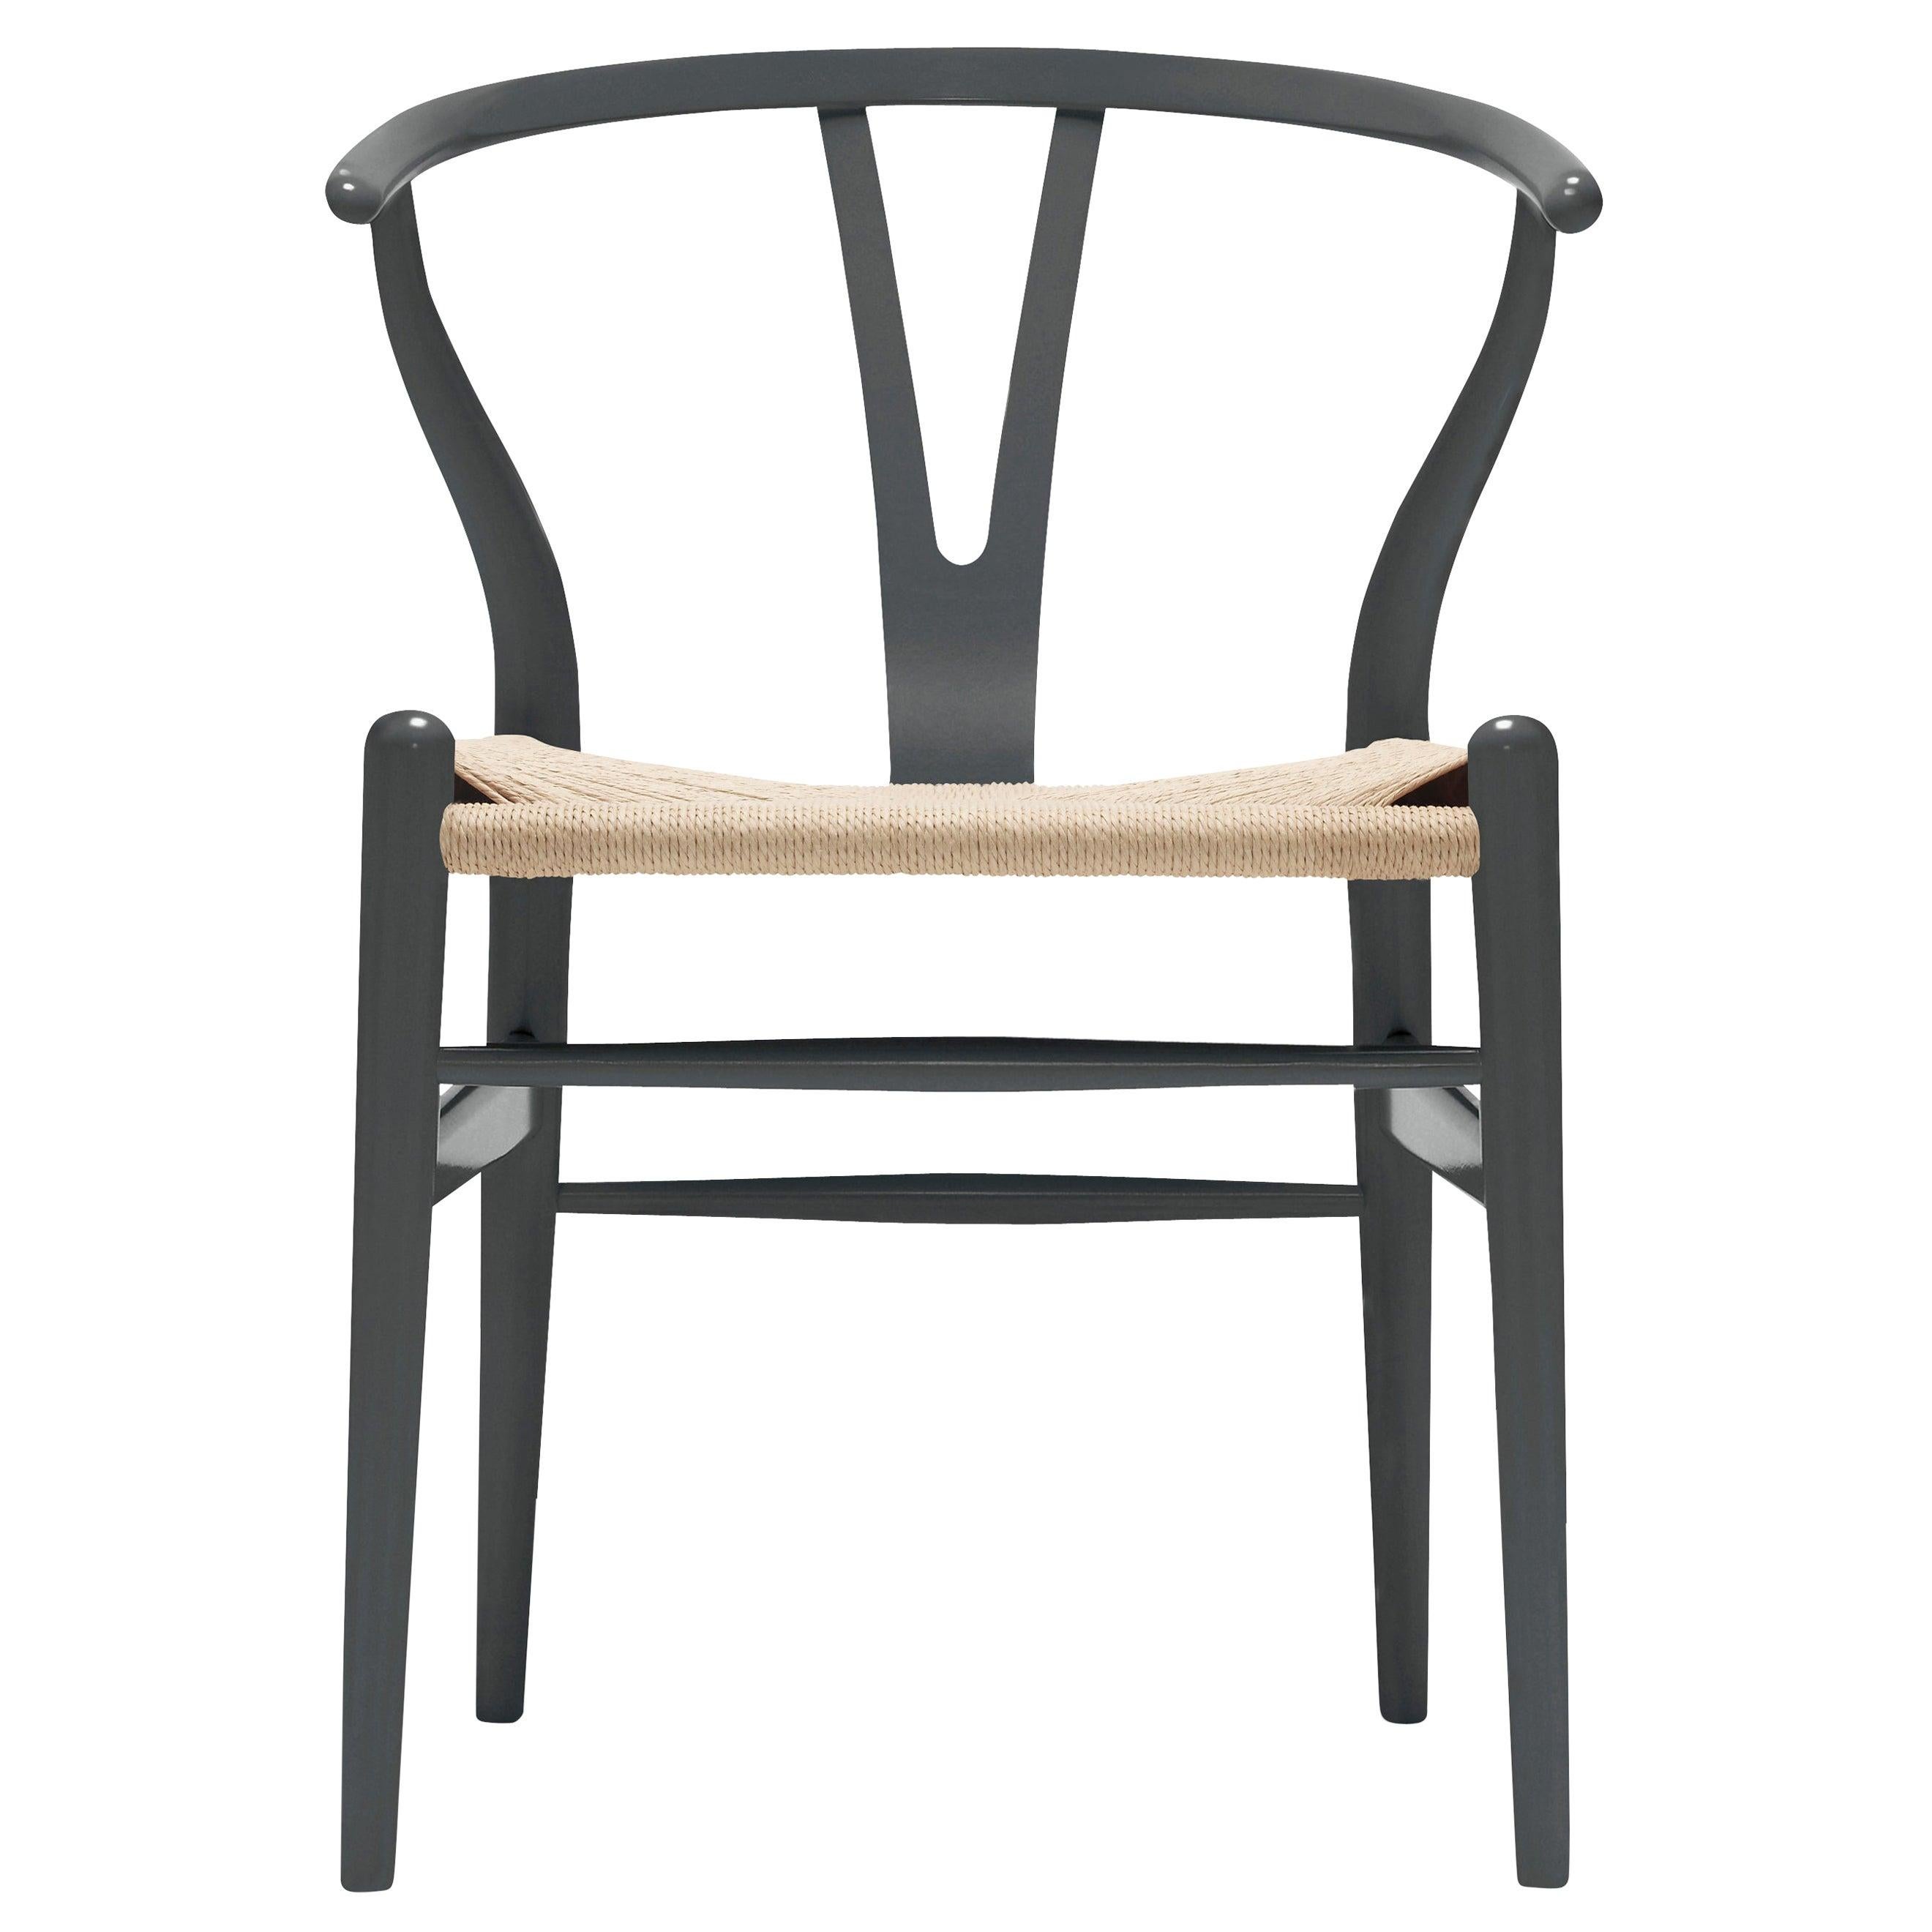 CH24 Wishbone Chair in Anthracite Gray & Natural Papercord Seat by Hans Wegner